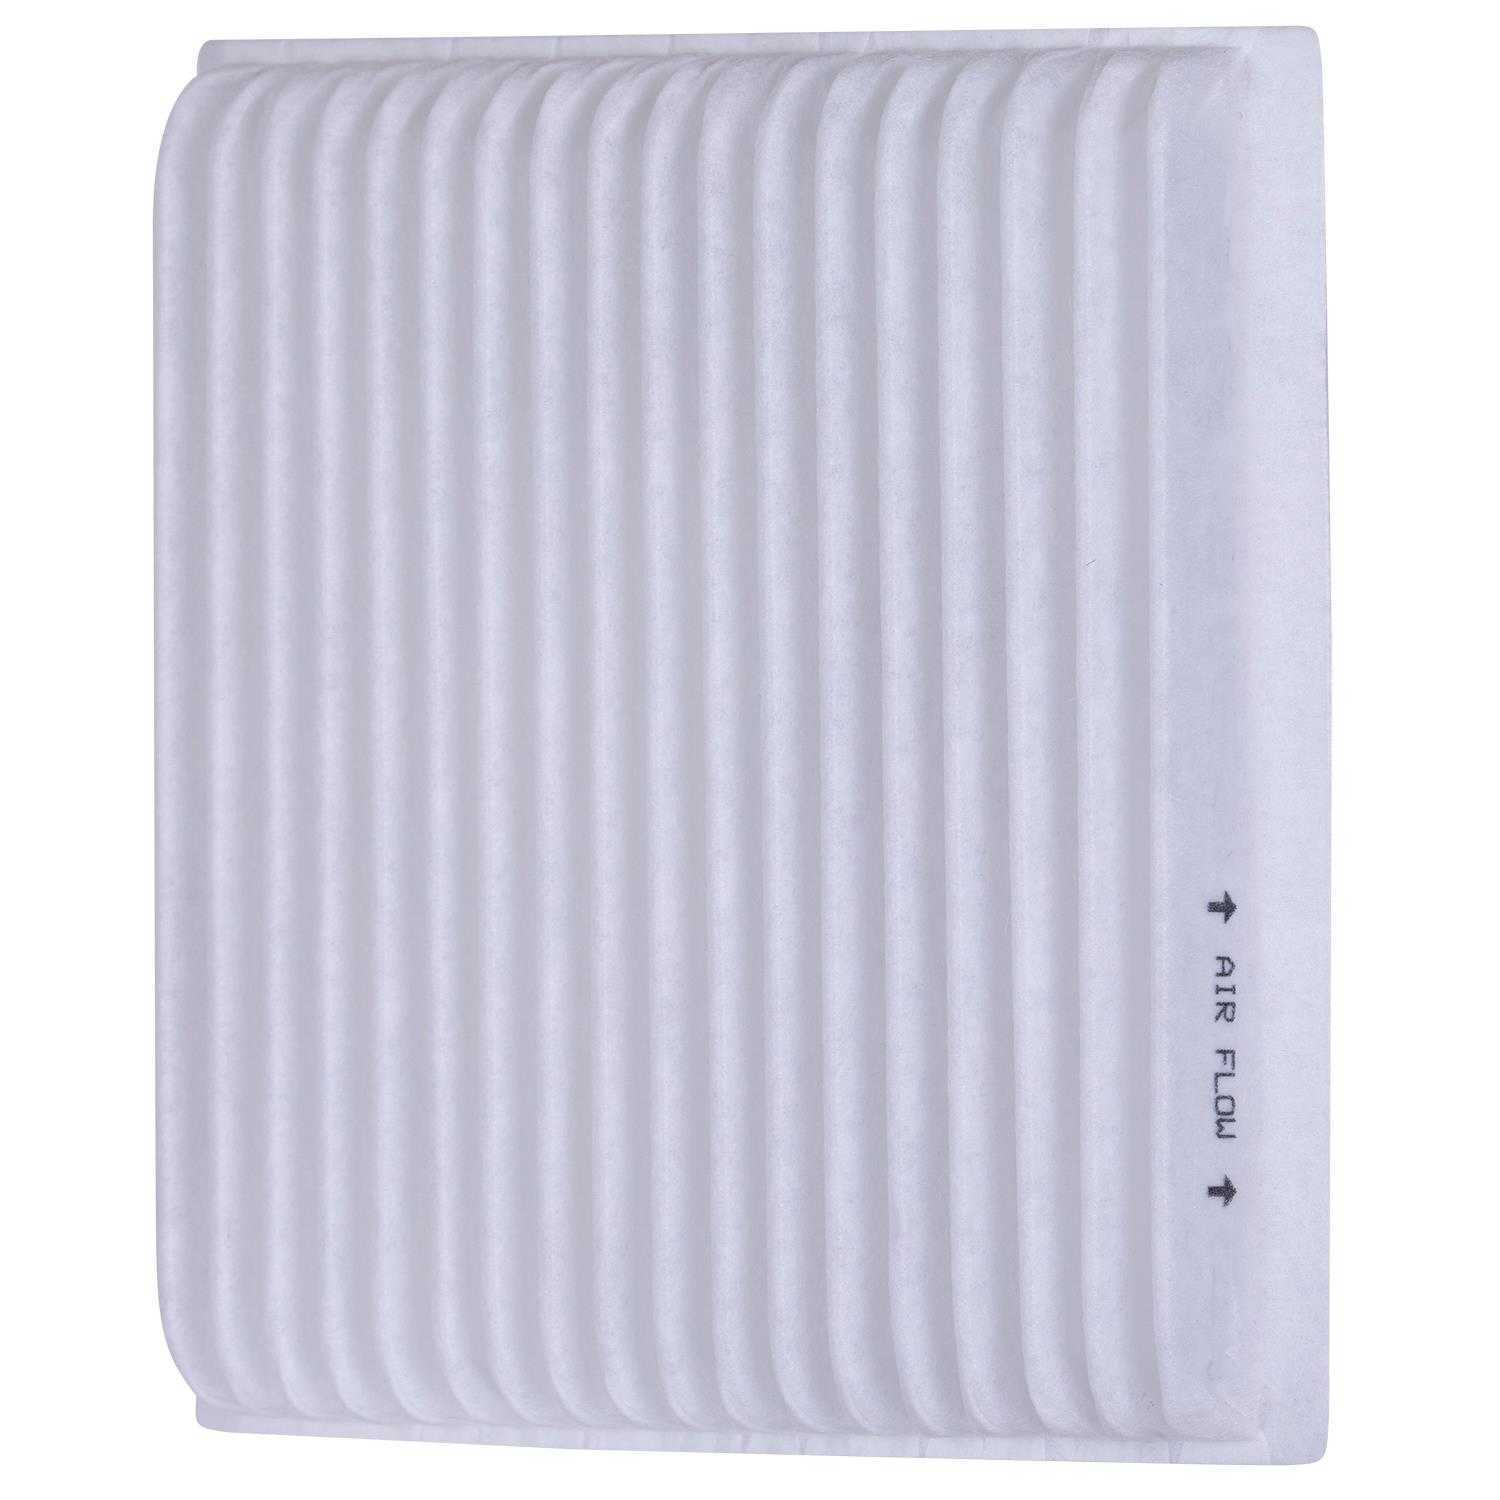 PRONTO/ID USA - Cabin Air Filter - PNP PC5876